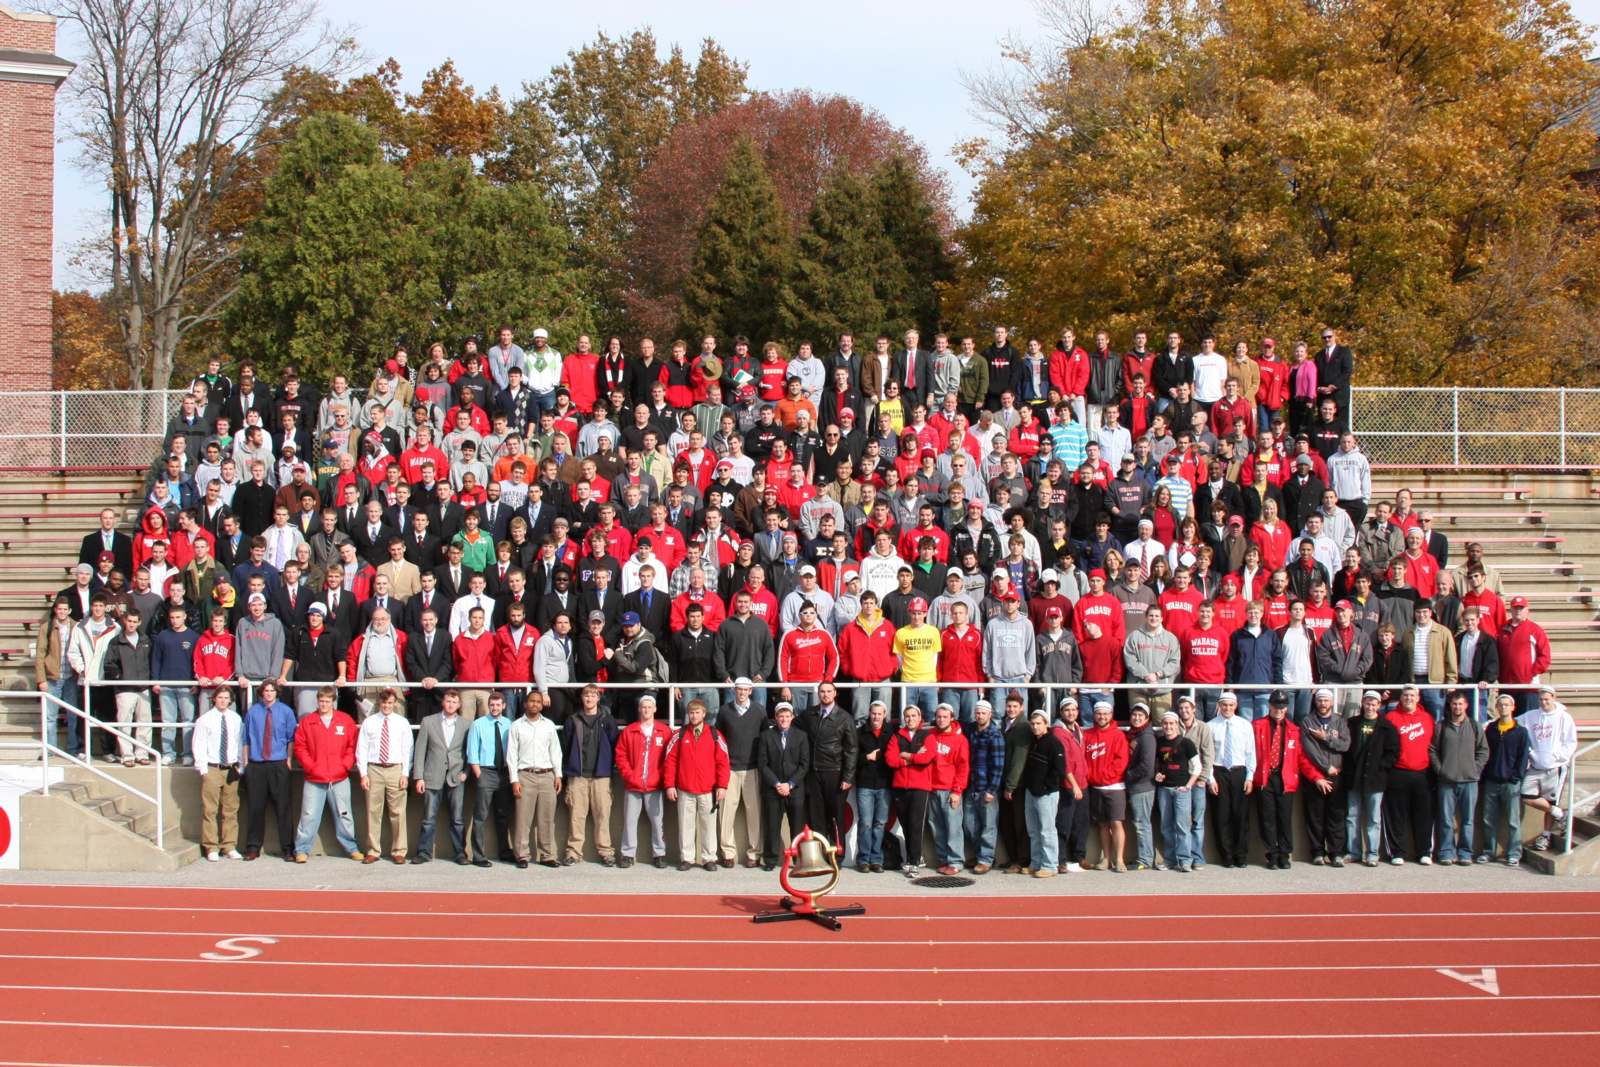 a large group of people standing on a track